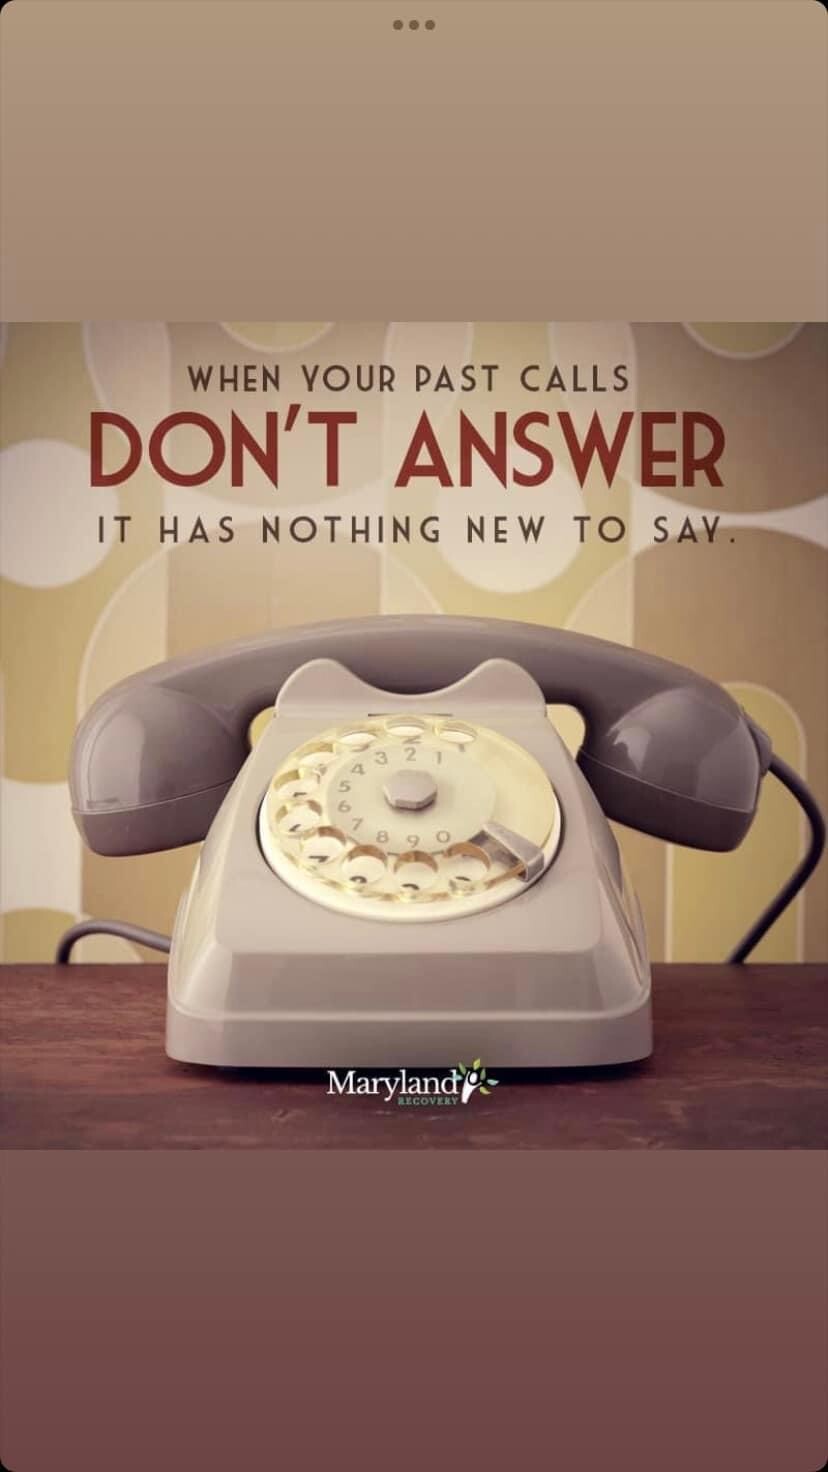 Don’t answer that call!